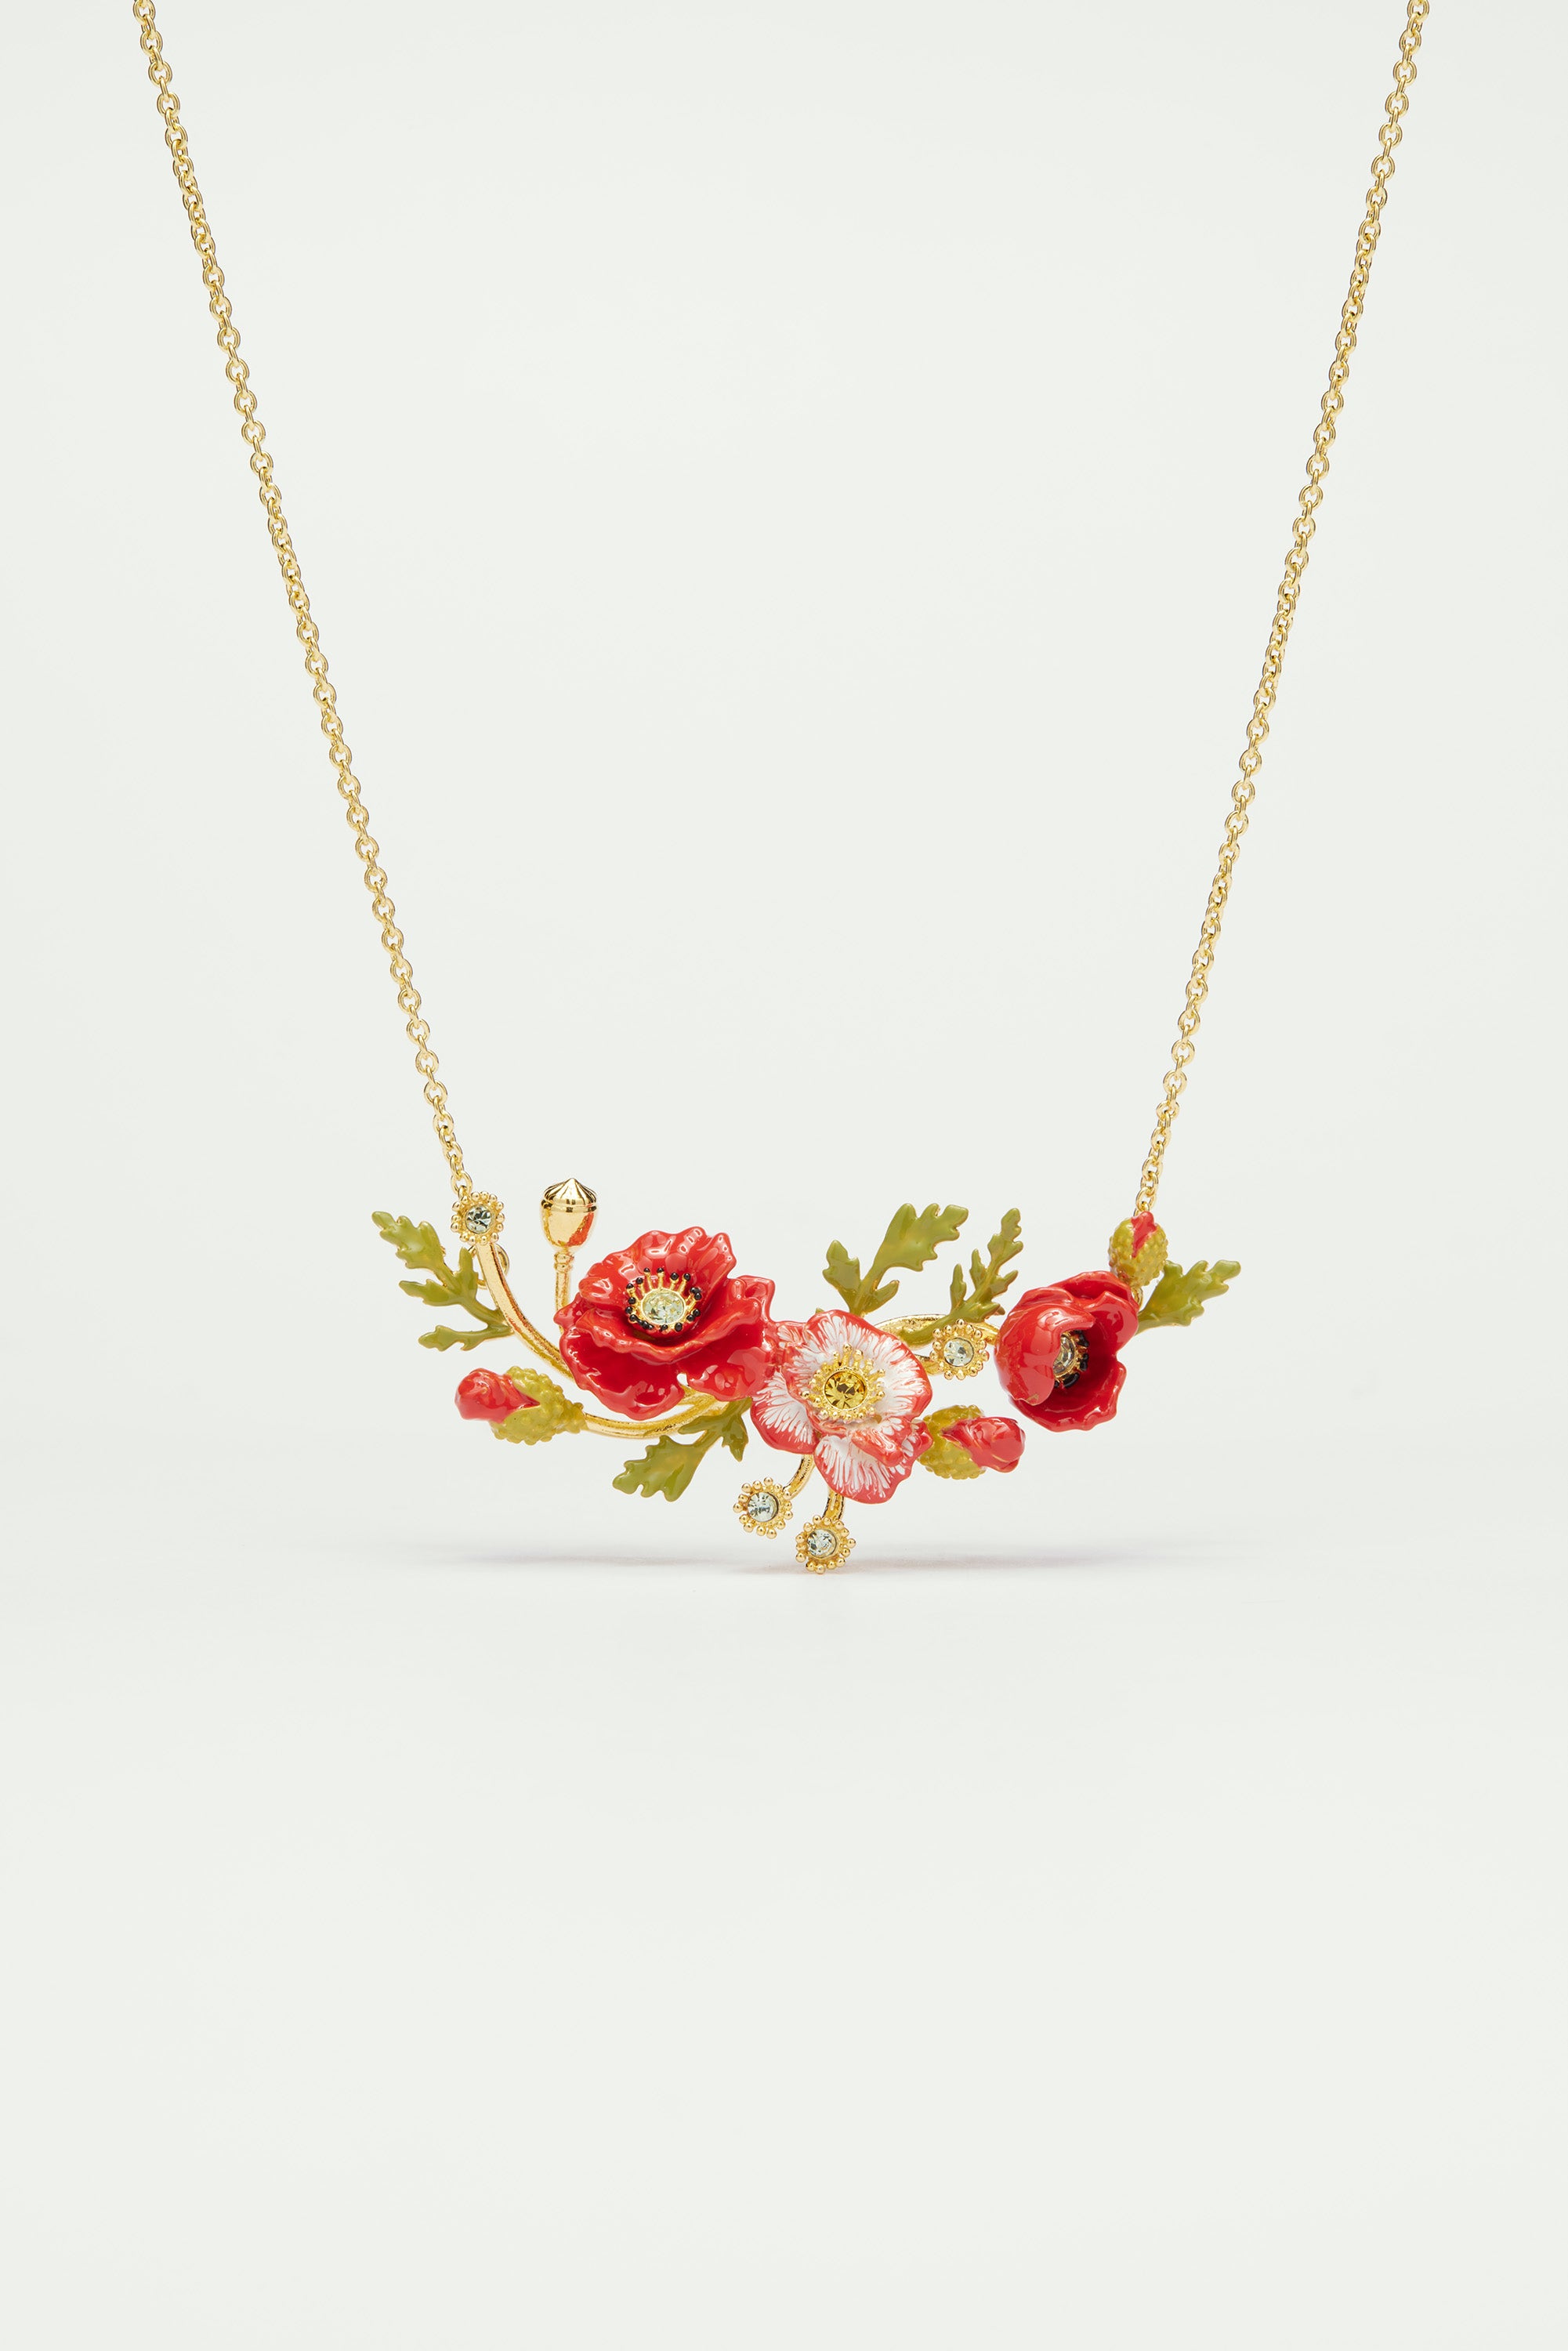 Poppy and daisy statement necklace